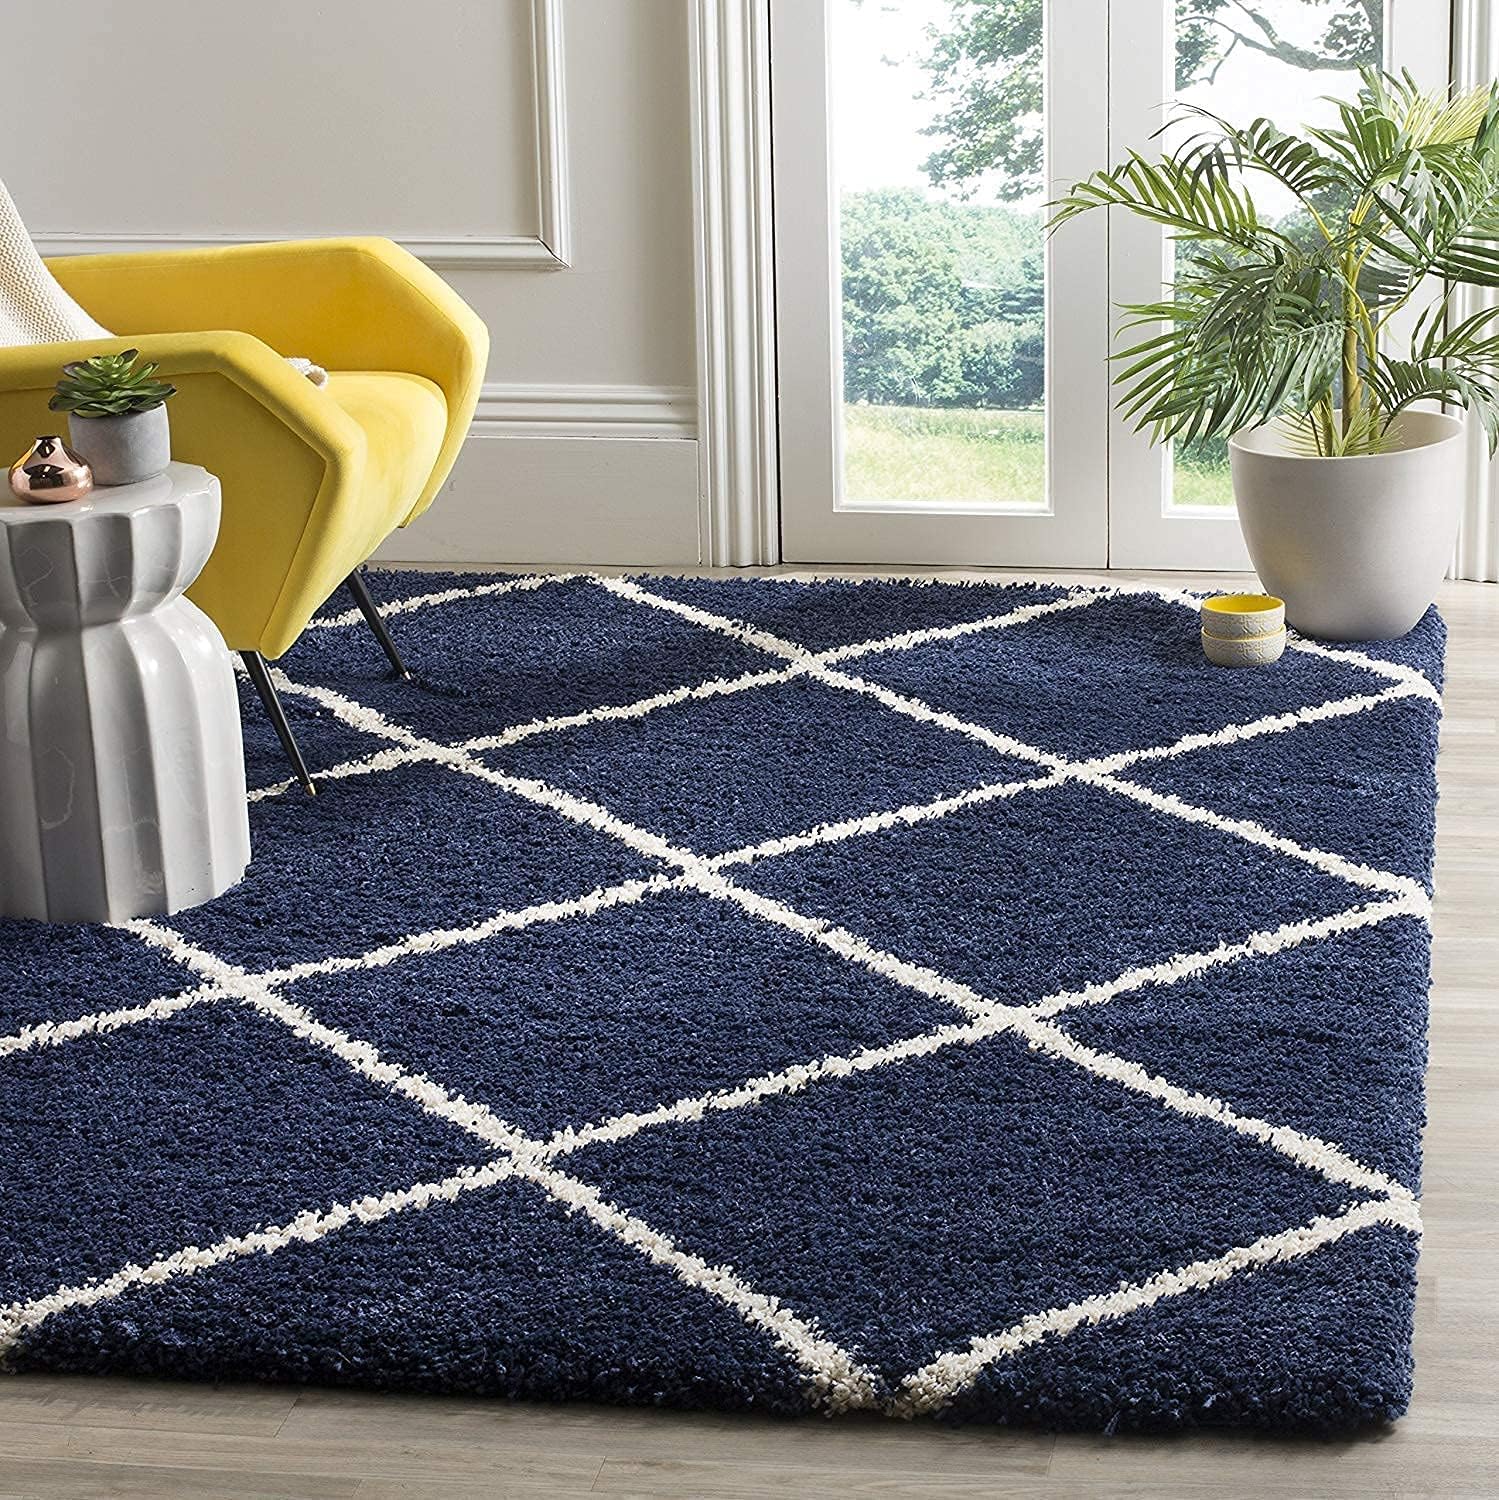 Kashyapa Rugs Collection - Moroccan Style Microfiber Carpet Runner In